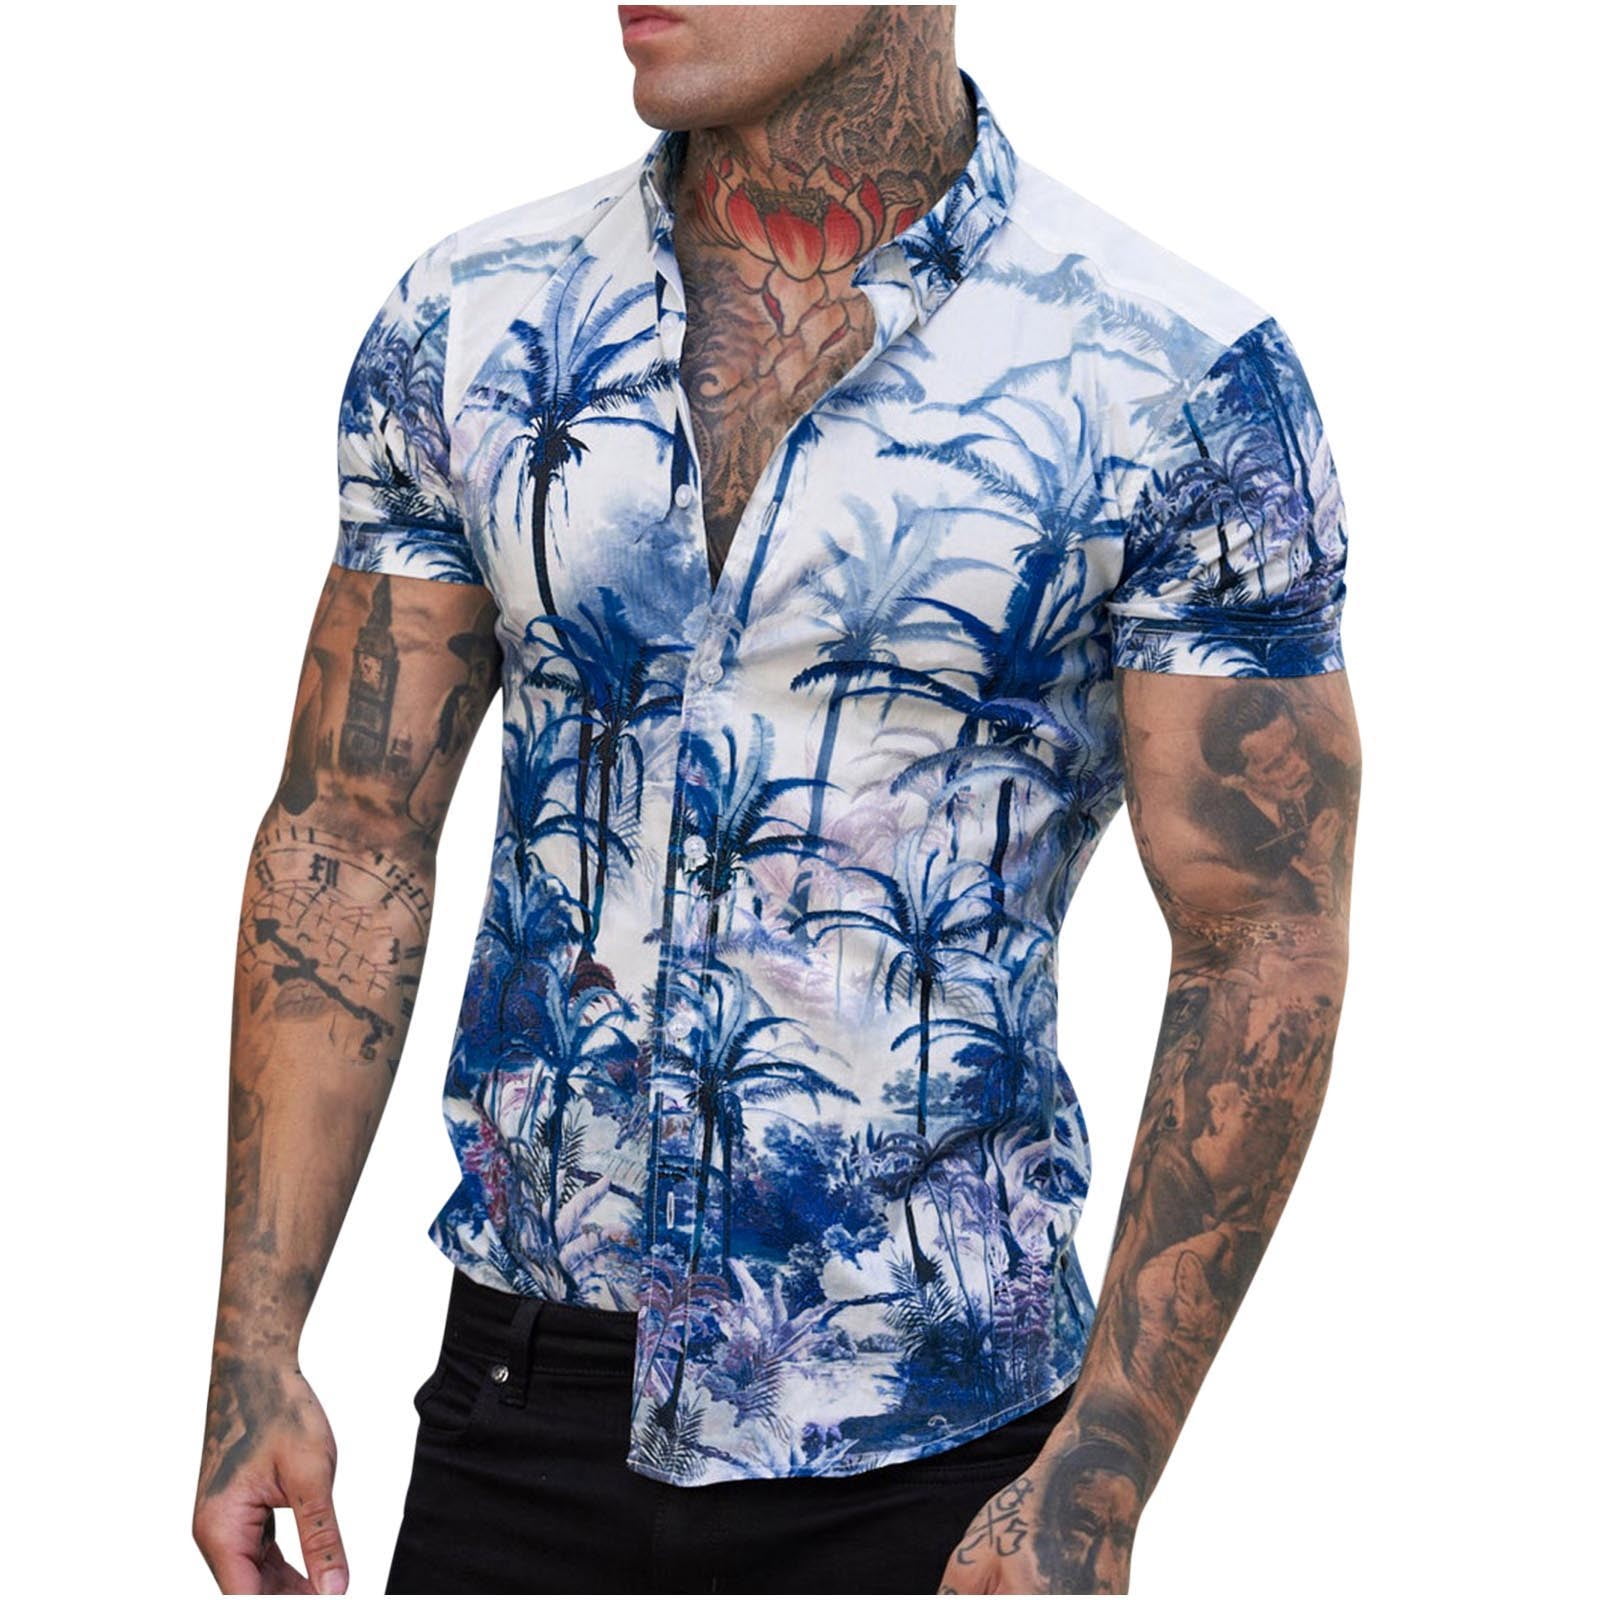 VSSSJ Casual Hawaiian Shirt for Men Short Sleeve Quick Dry Cruise Beach  Lapel Button Down Shirts Relaxed Fit Tropical Graphic Tees Blue XL